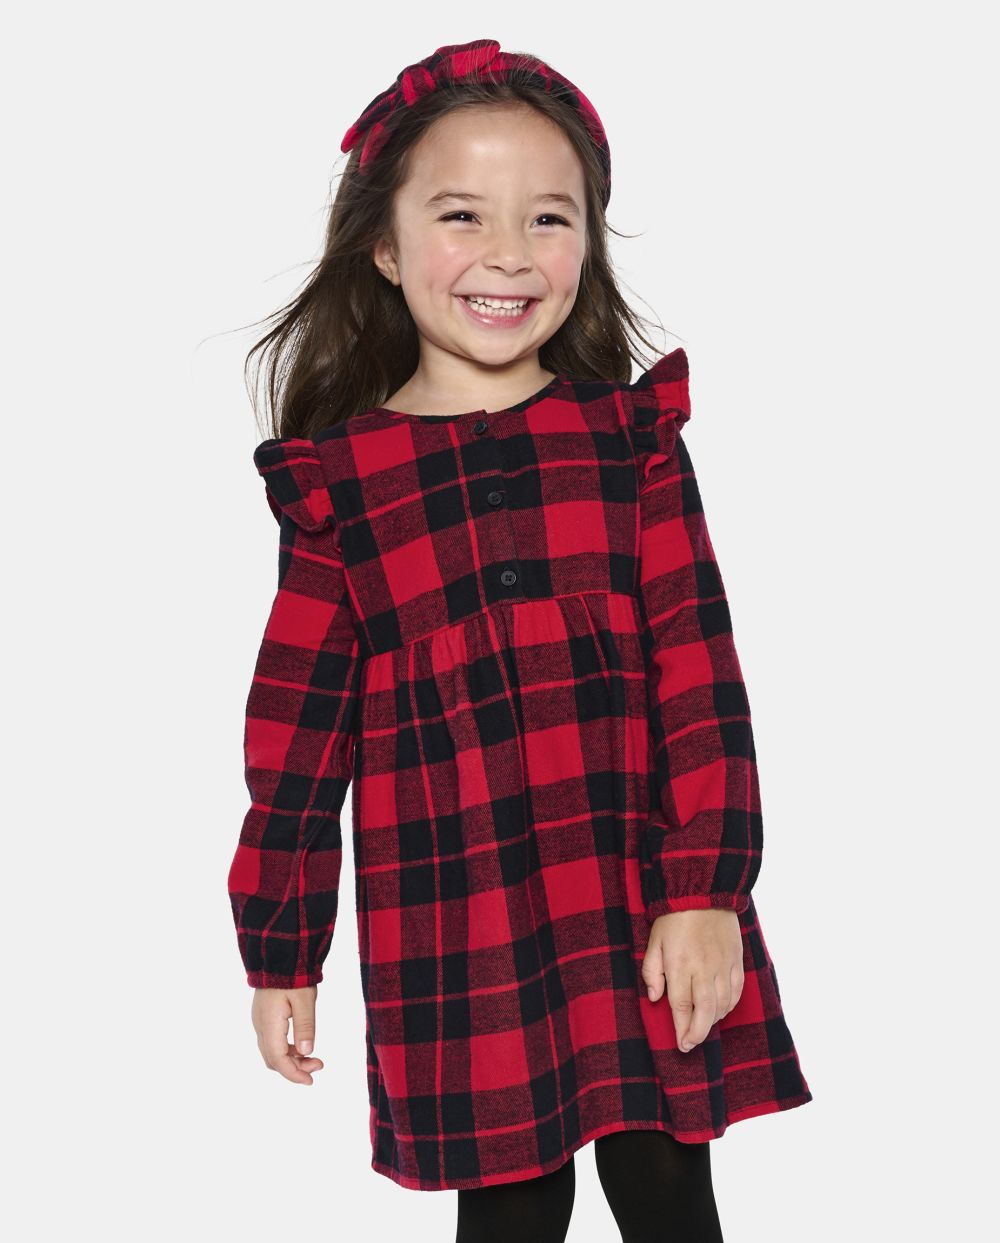 Toddler Baby Above the Knee Plaid Print Flutter Long Sleeves Button Front Crew Neck Shirt Dress